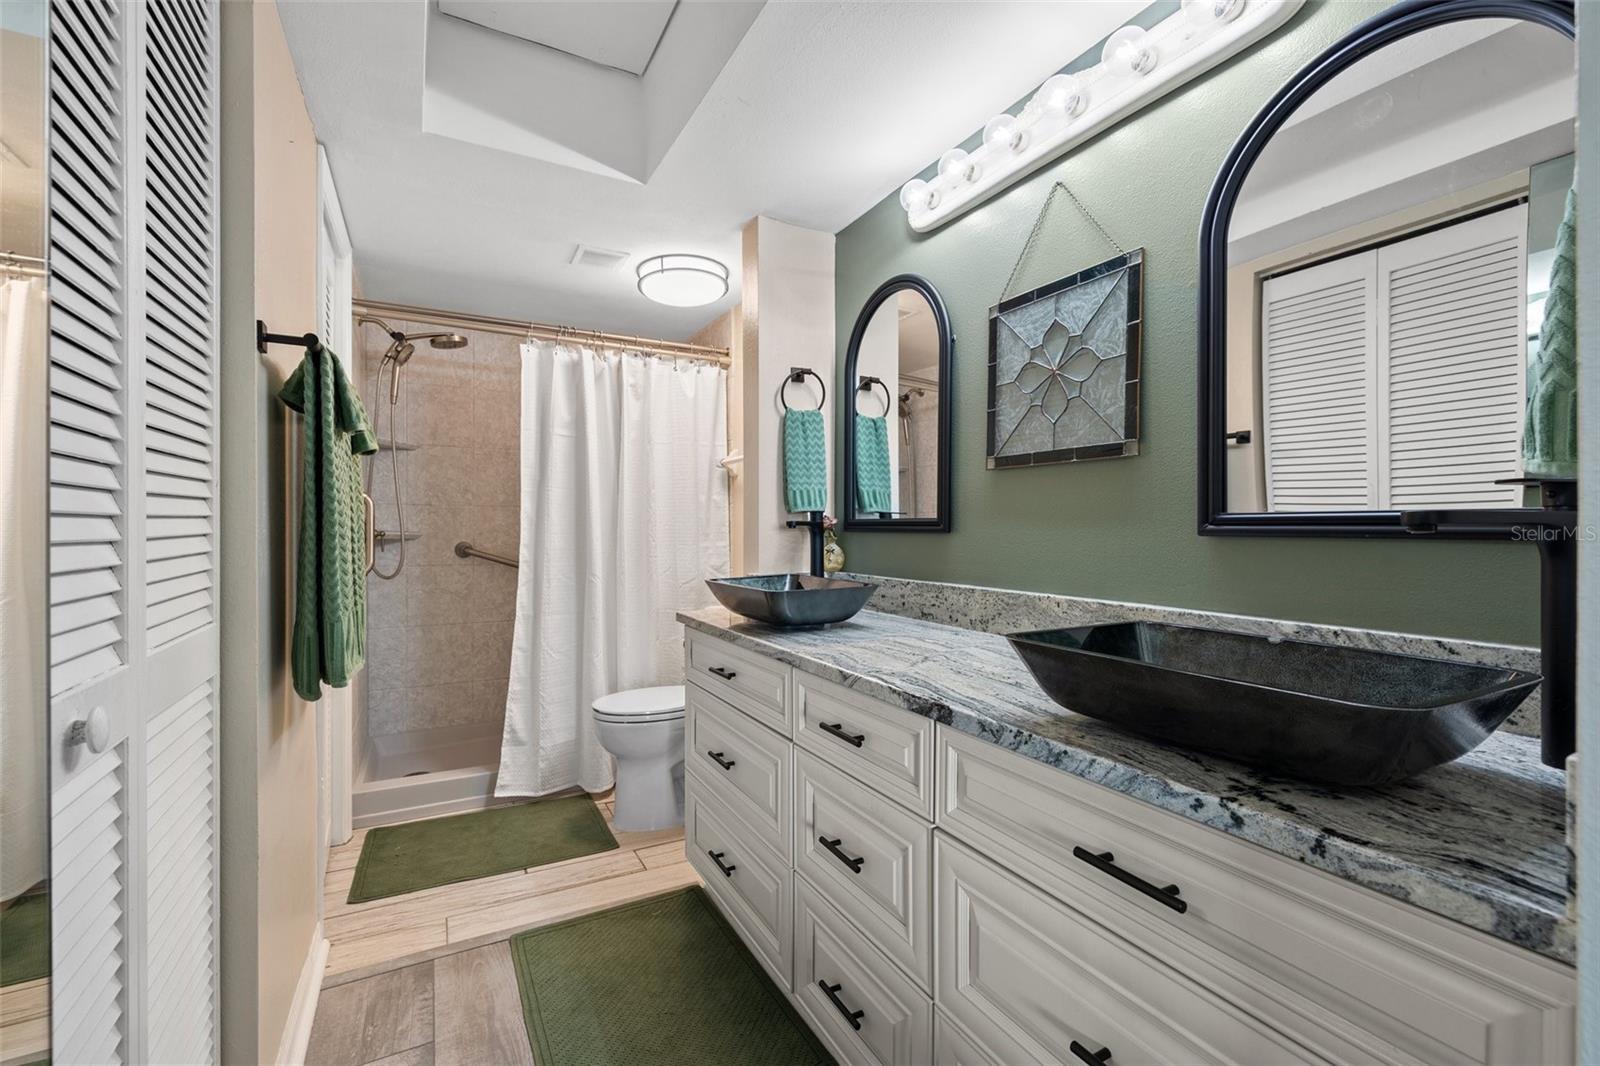 Primary ensuite bathroom with walk in shower and walk in closet!